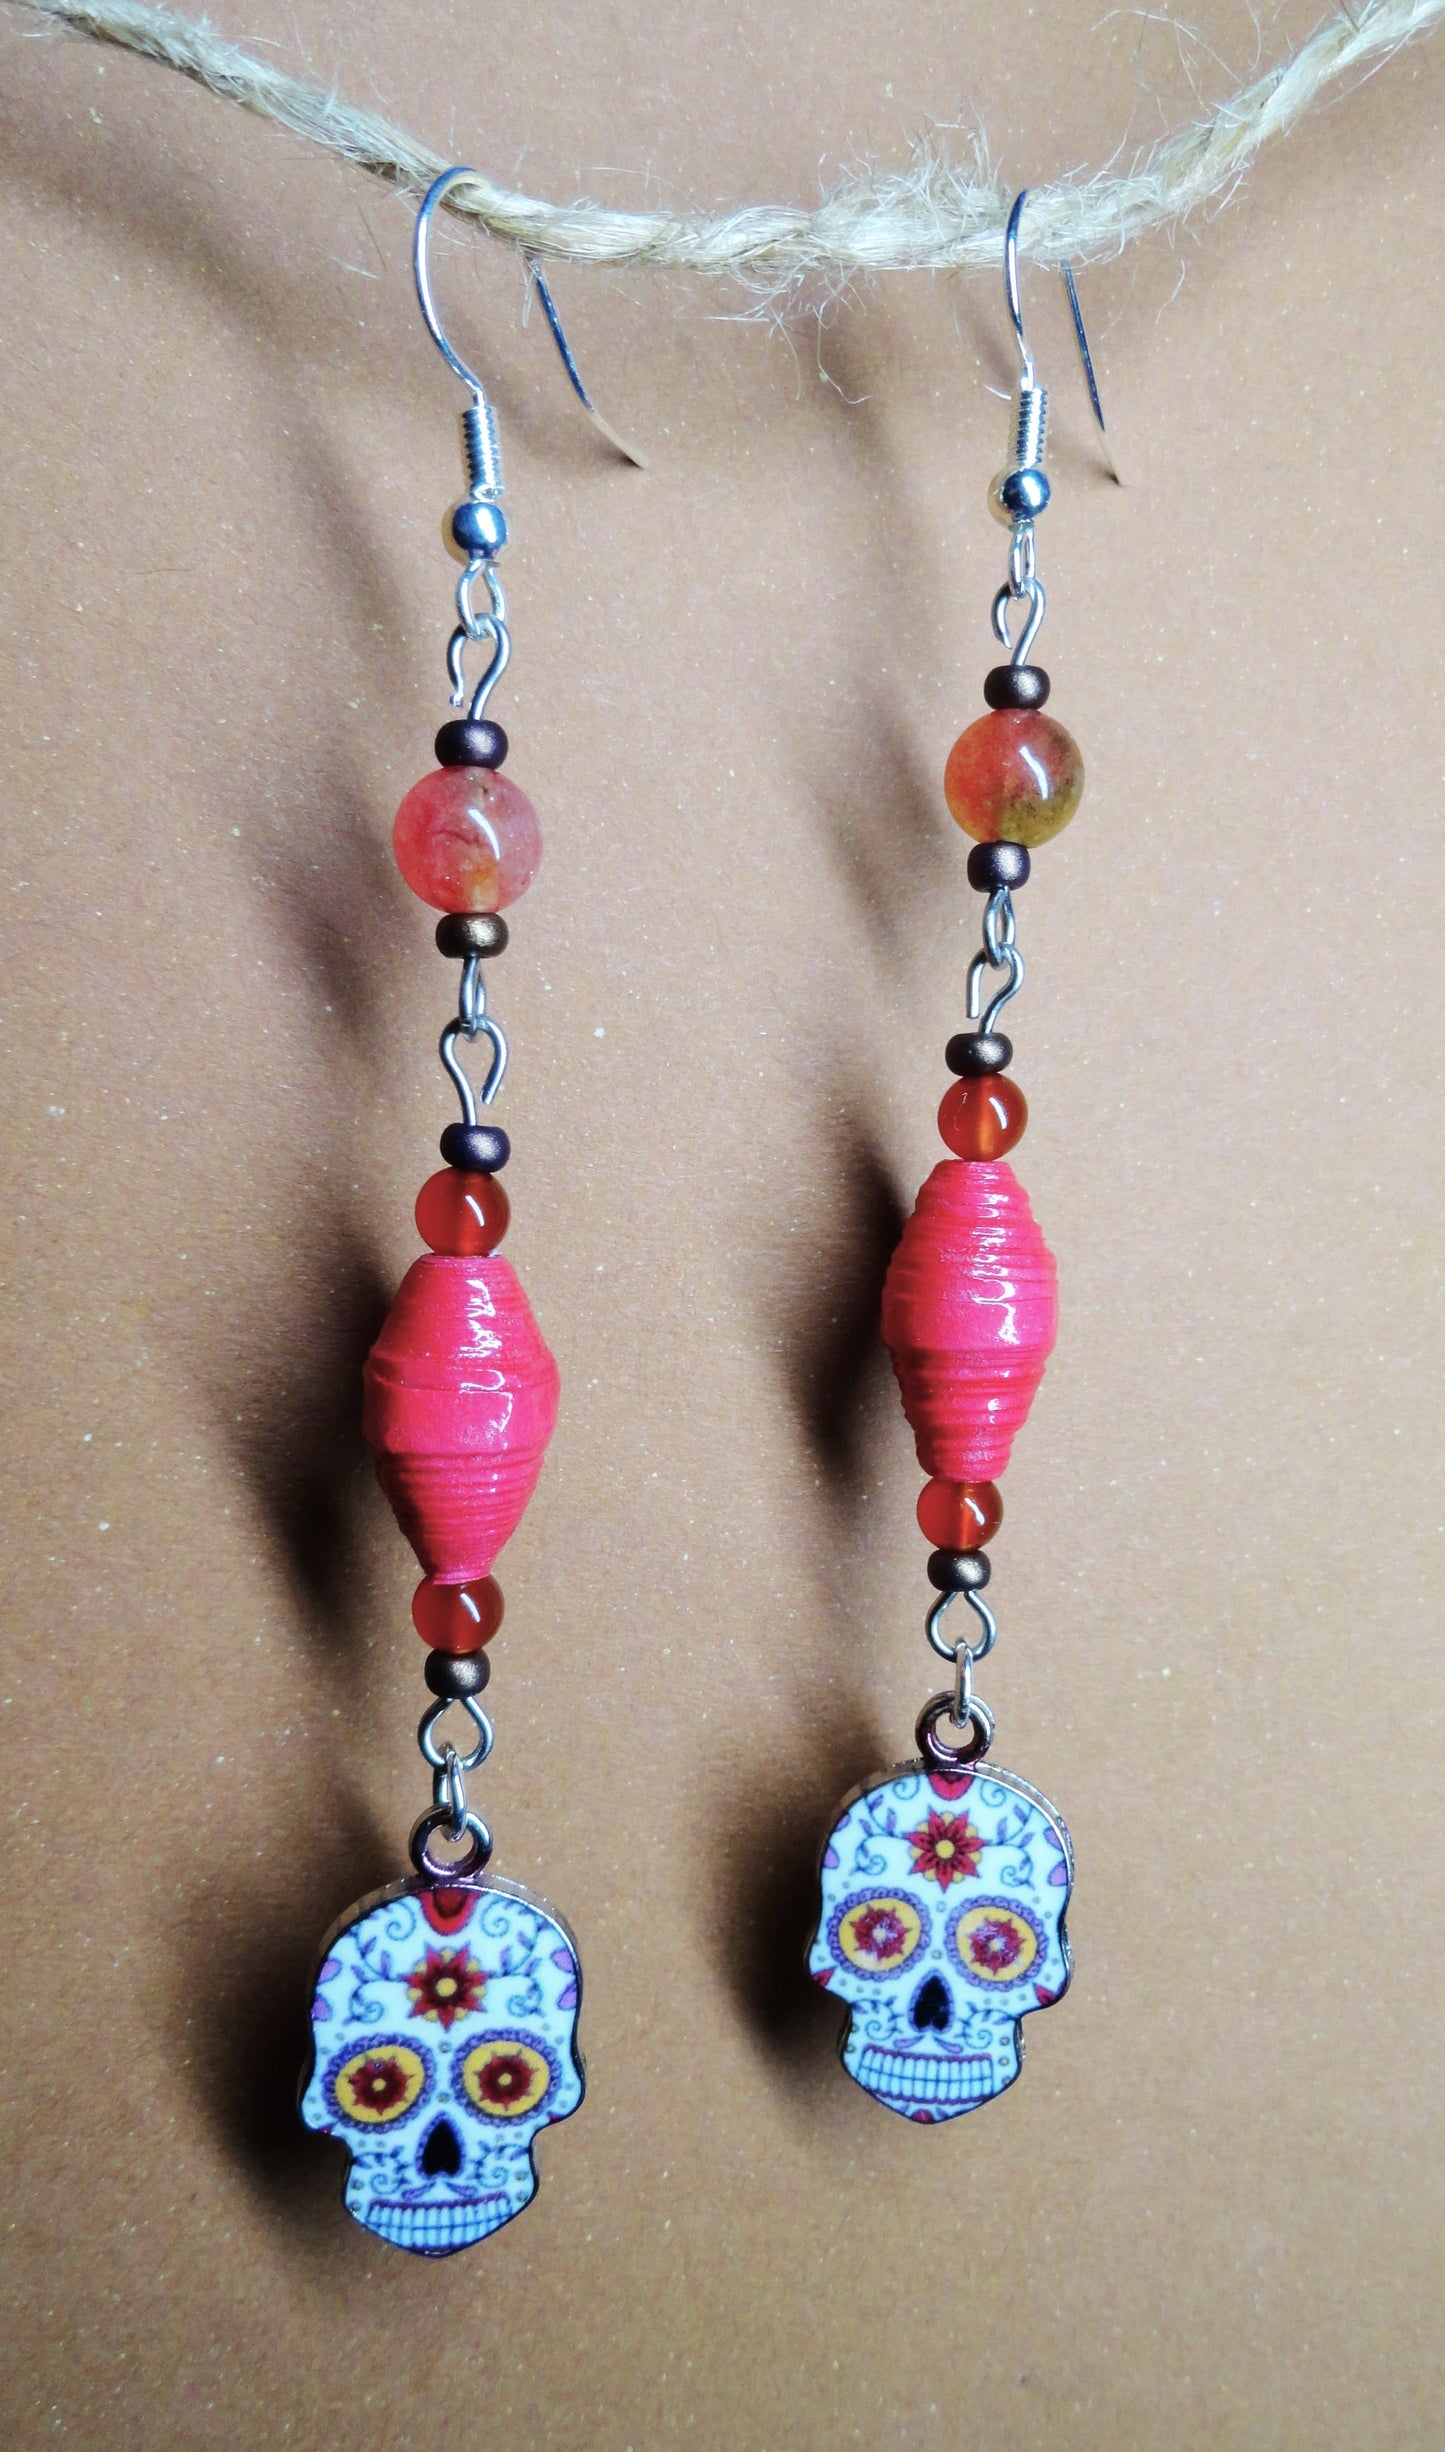 Skull Earrings With Red Handmade Paper Beads and Glass Beads